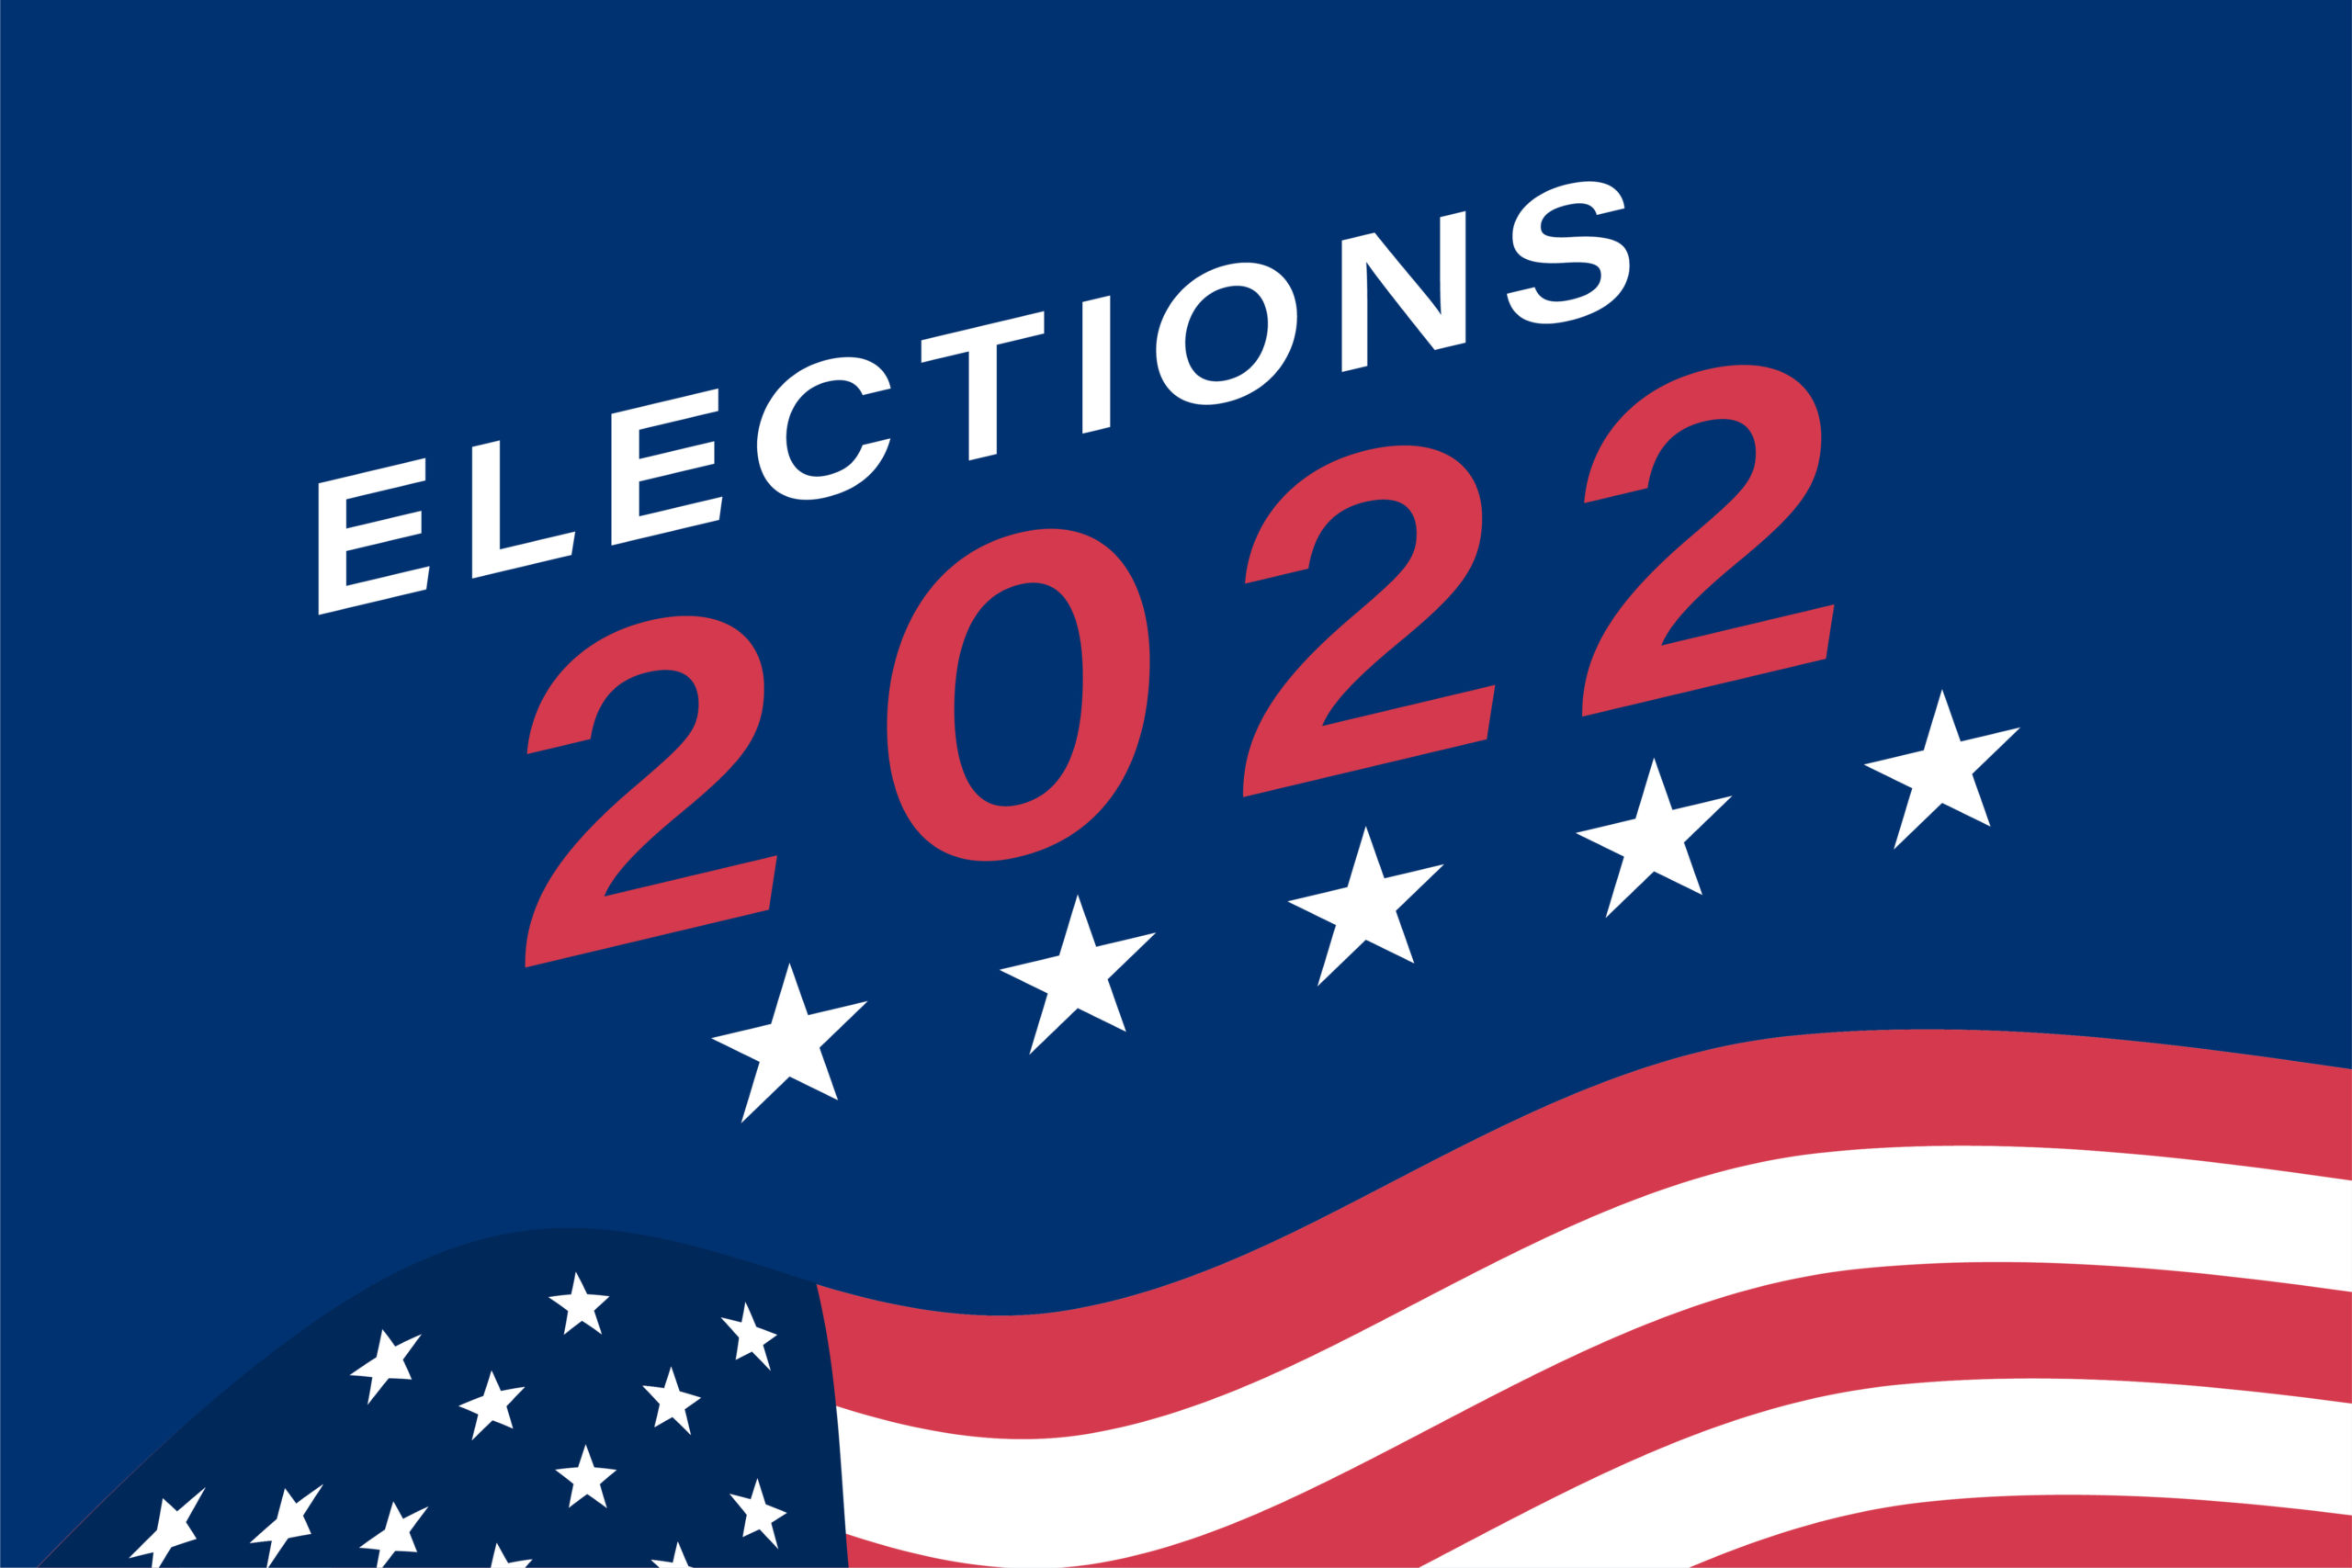 Elections 2022 on background including part of US flag